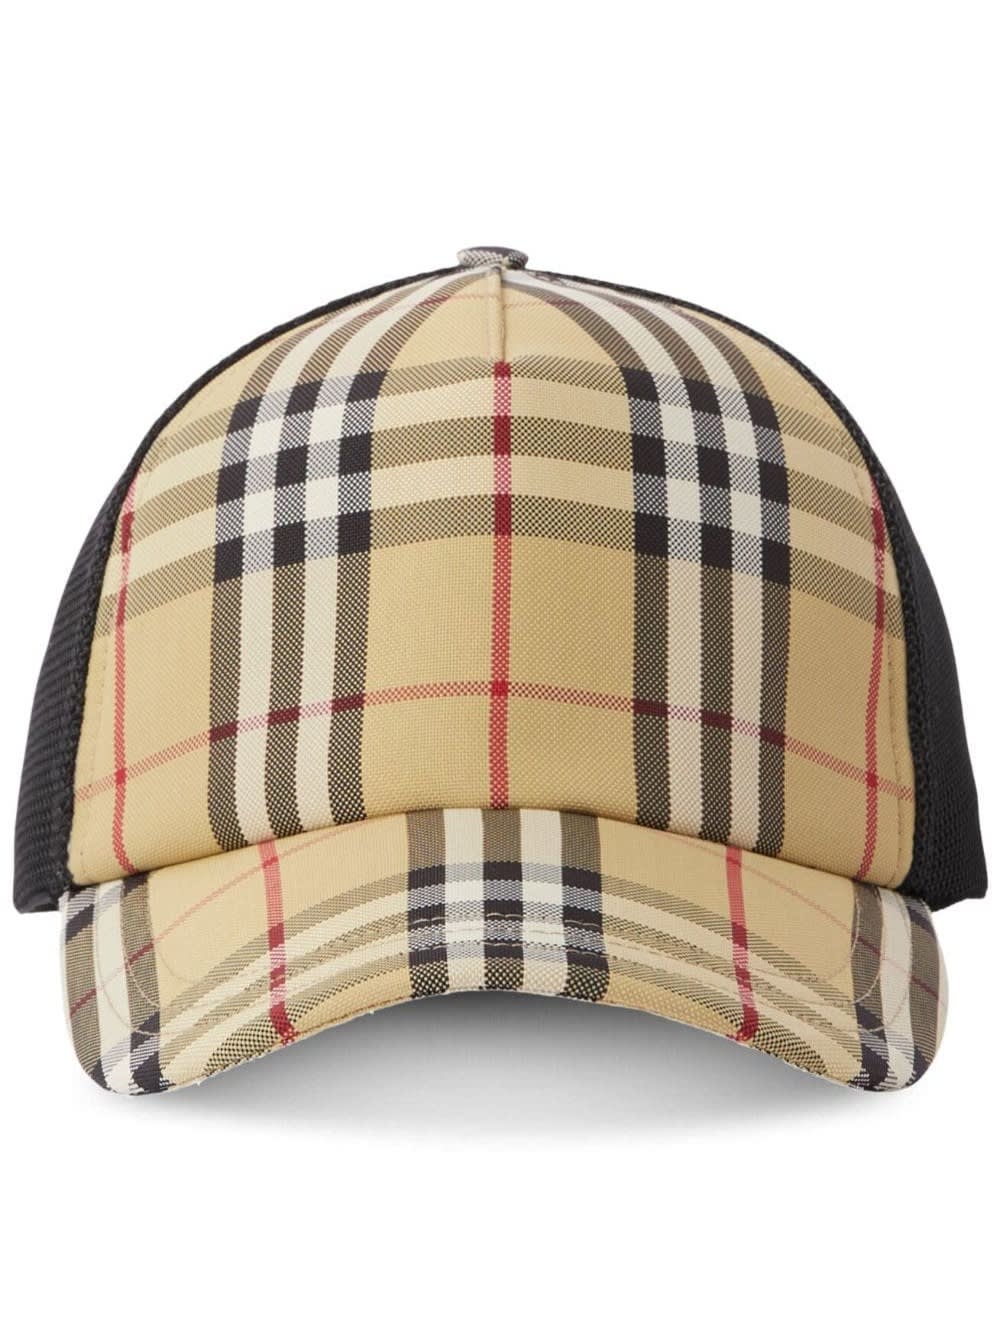 BURBERRY BEIGE BASEBALL CAP WITH VINTAGE CHECK MOTIF AND MESH INSERT IN NYLON MAN